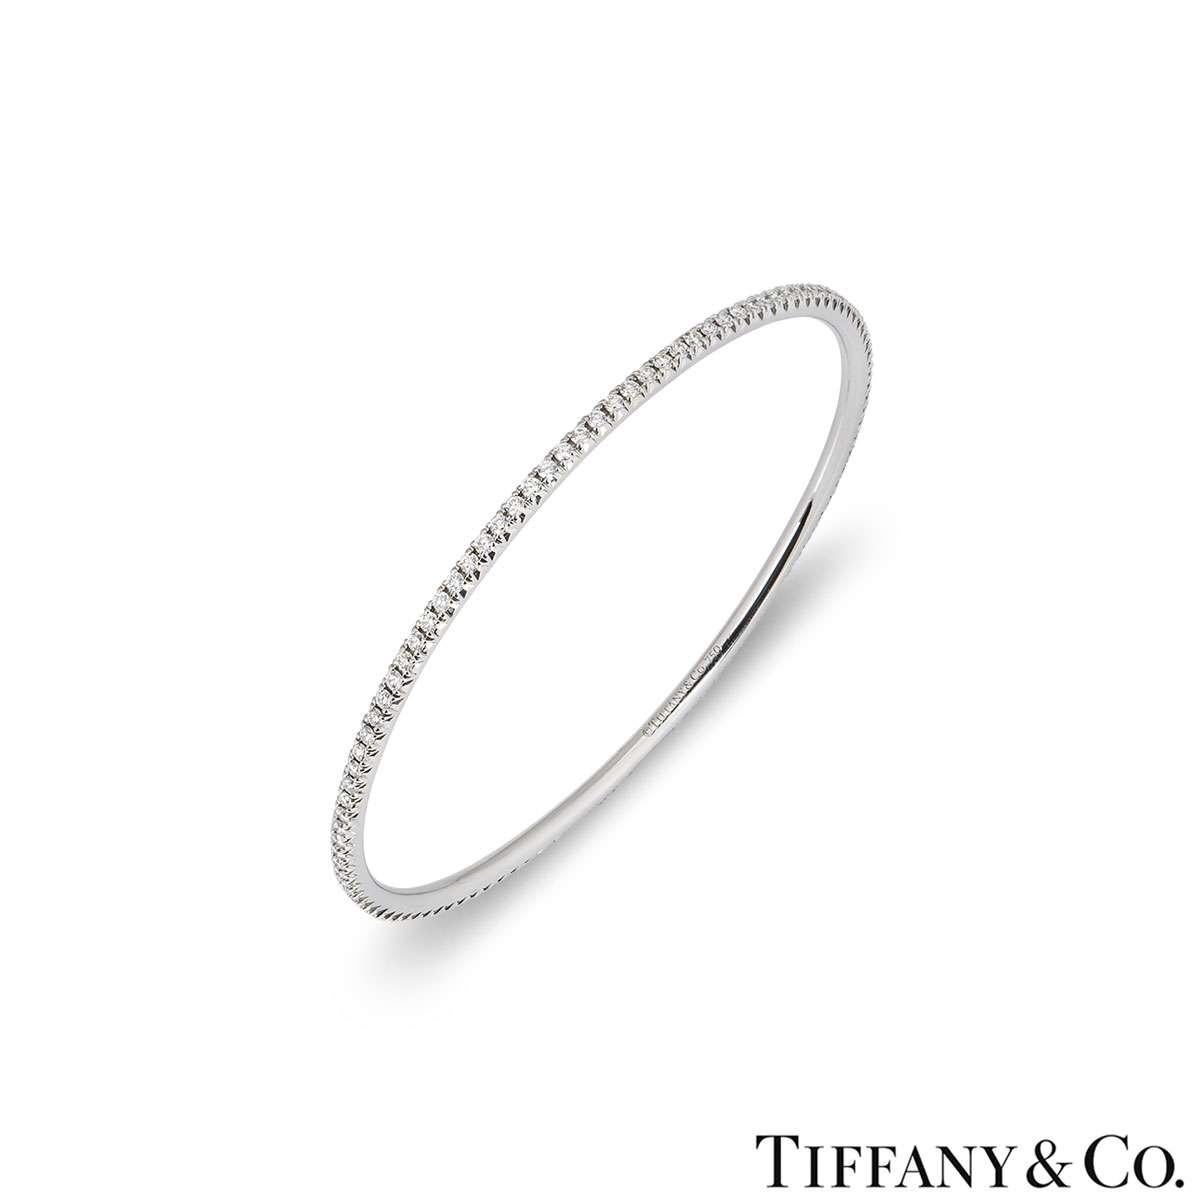 An elegant white gold diamond bangle by Tiffany & Co. The bangle features claw set round brilliant cut diamonds with a total weight of approximately 2.10ct. The bangle measures 2.3mm in width and has a circumference of 19cm. The bangle has a gross